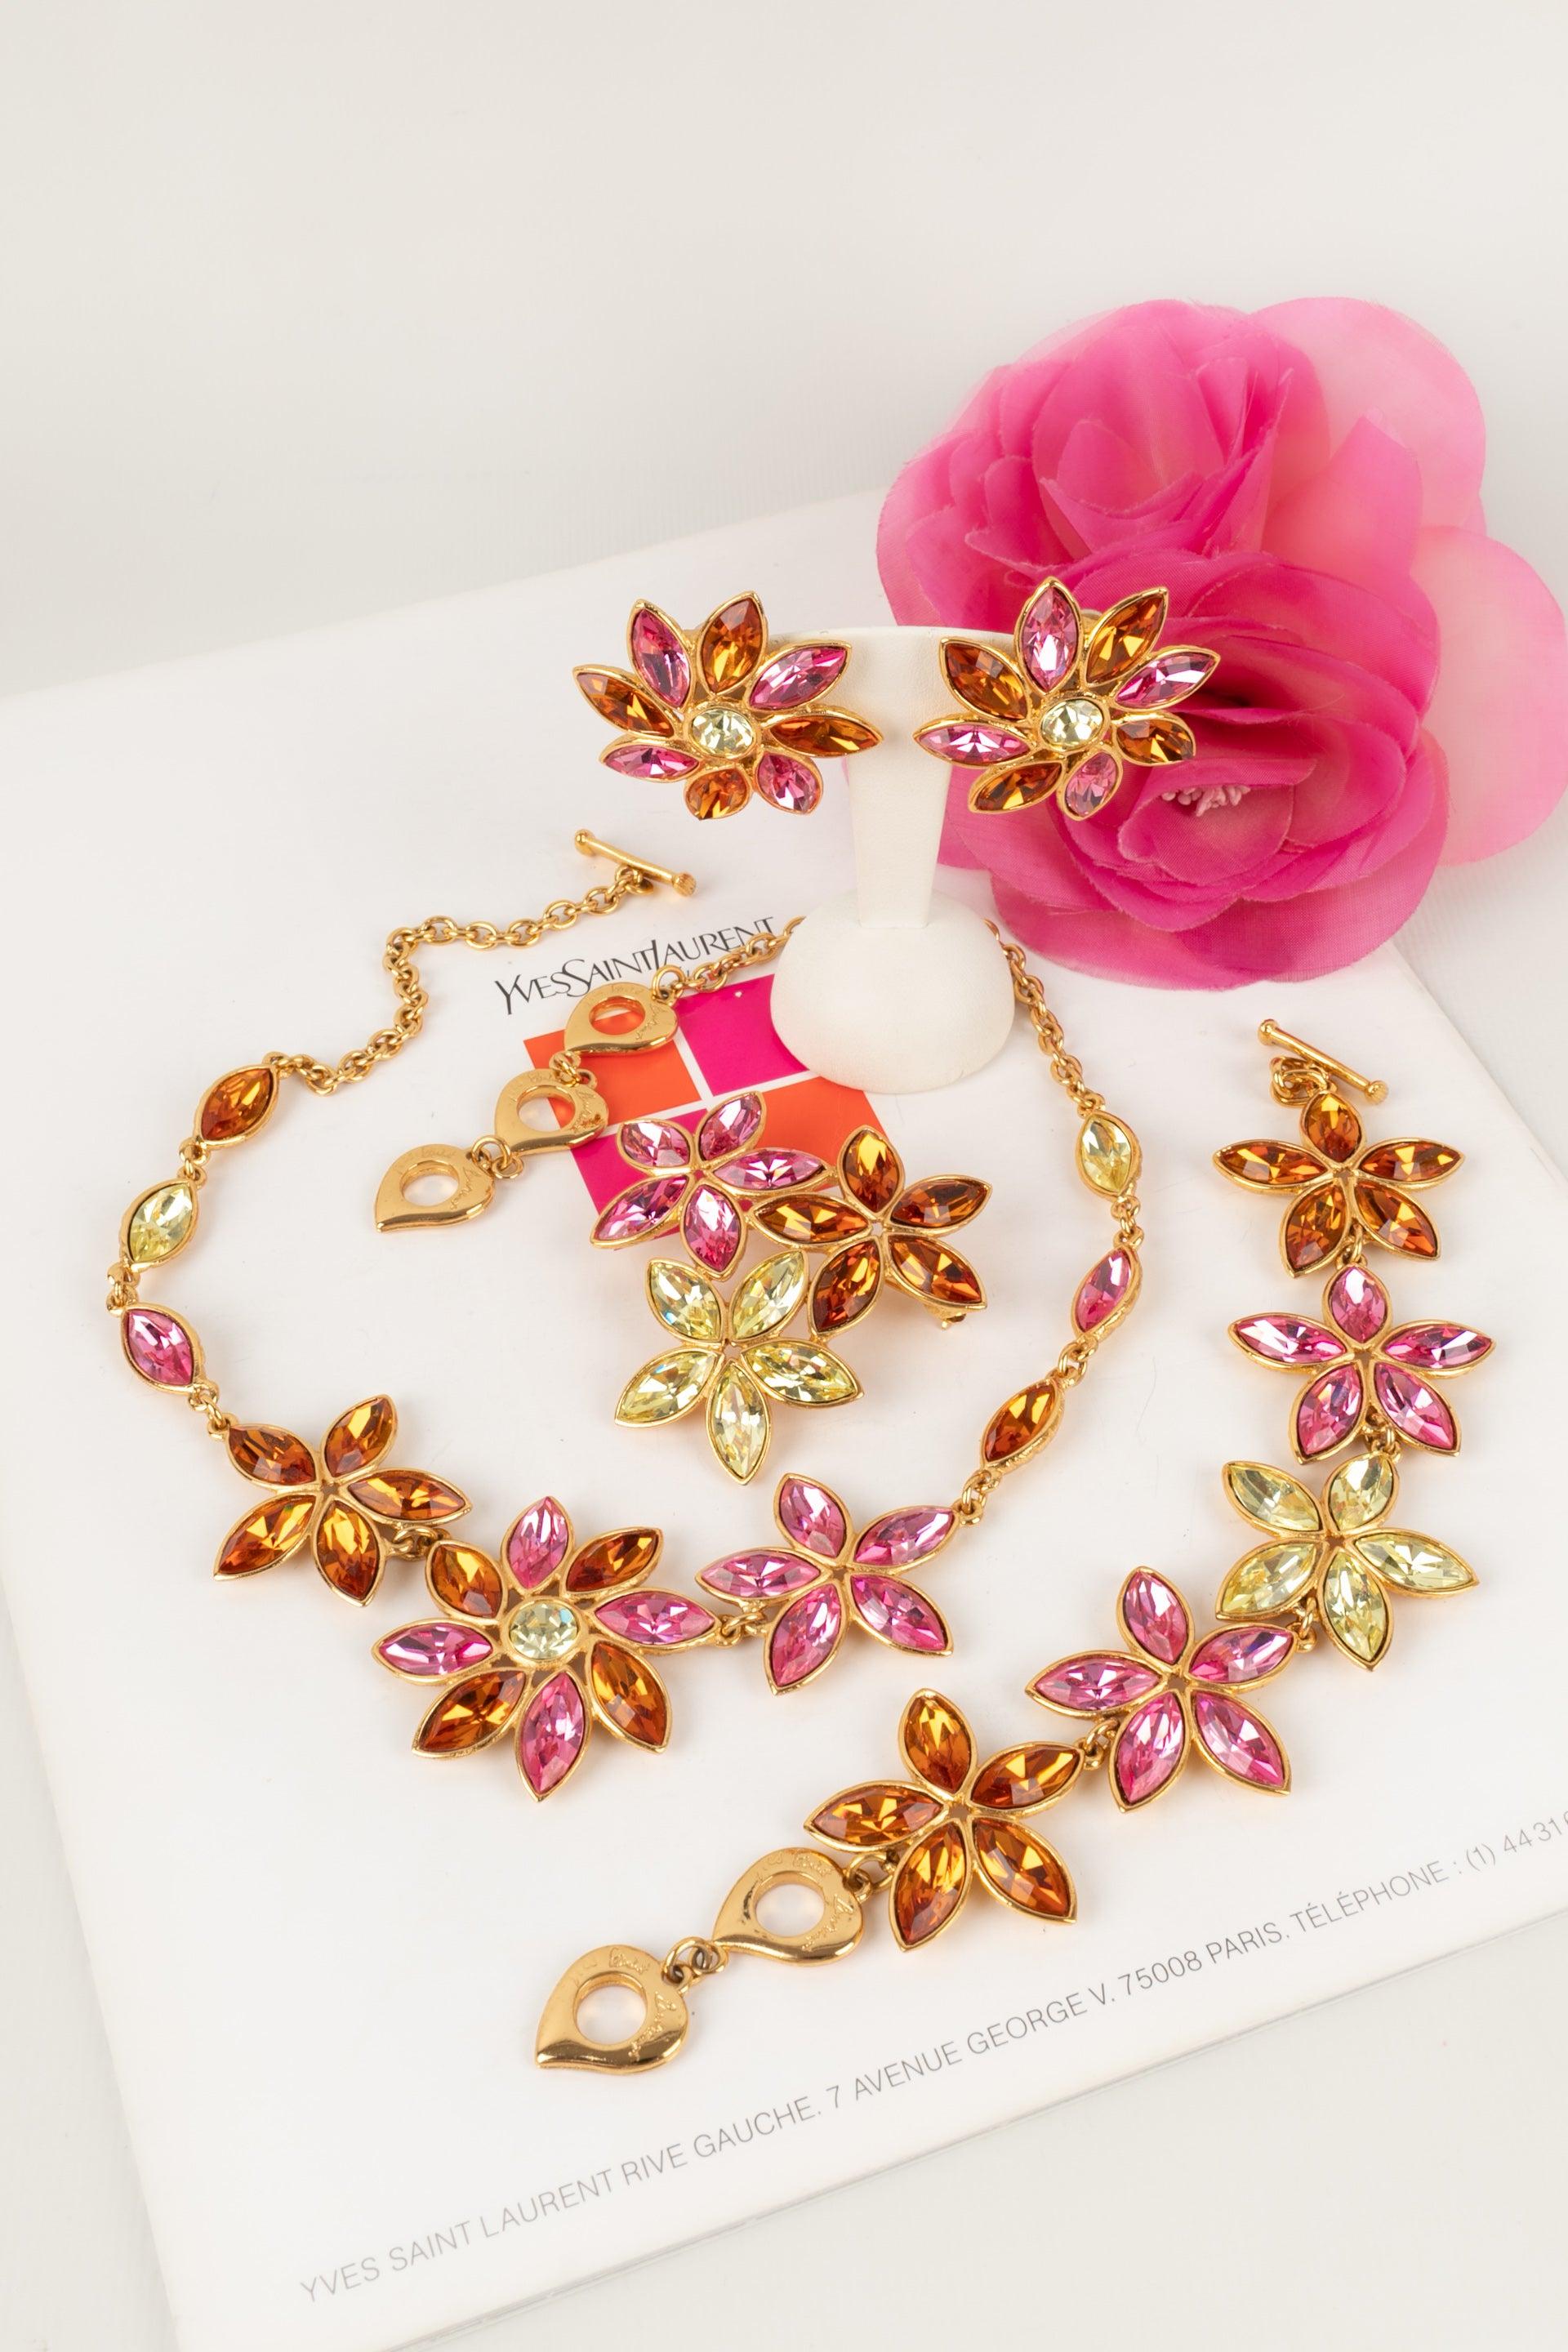 Yves Saint Laurent - (Made in France) Golden metal jewelry composed of a necklace, a bracelet, a brooch, and clip-on earrings with colored rhinestones.

Additional information:
Condition: Very good condition
Dimensions: Necklace length: from 46.5 cm